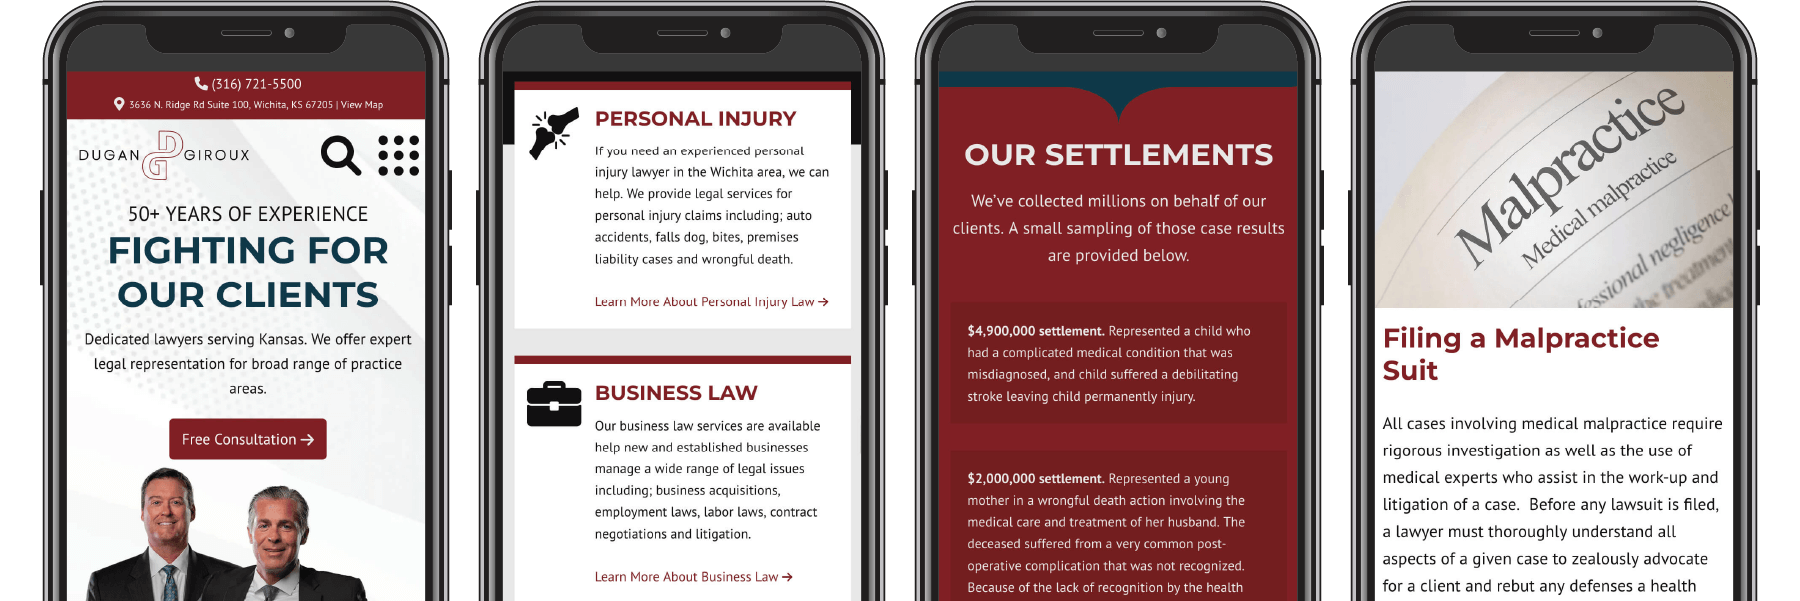 Four pages of the Dugan & Giroux website displayed on four phones.